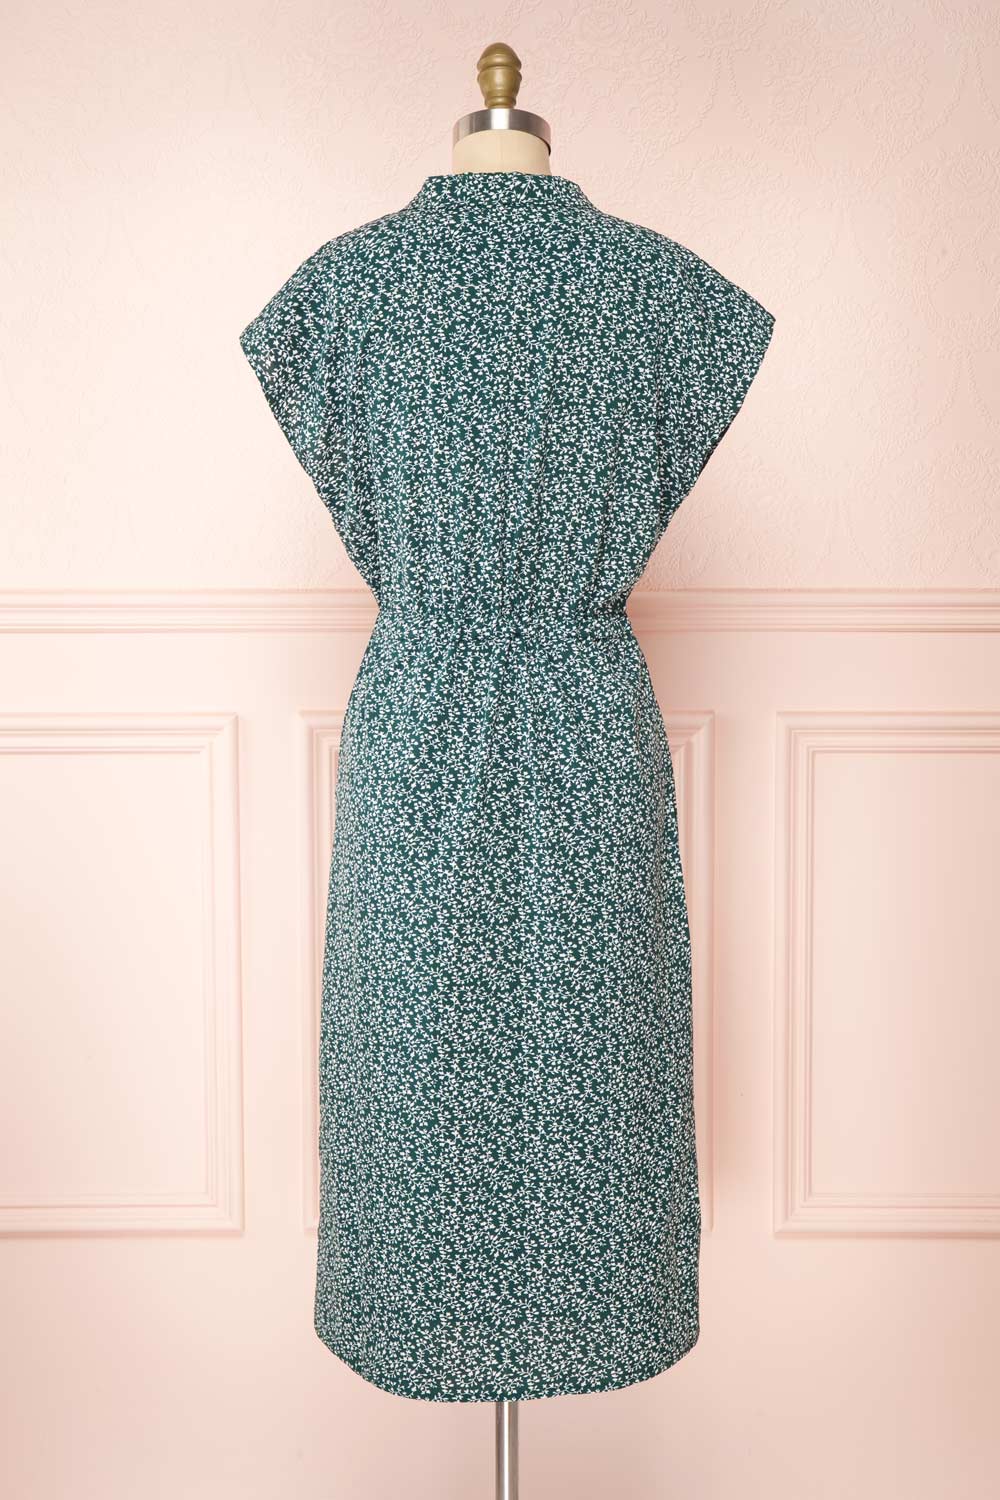 Pegae Green Patterned Short Sleeve Dress | Boutique 1861 back view